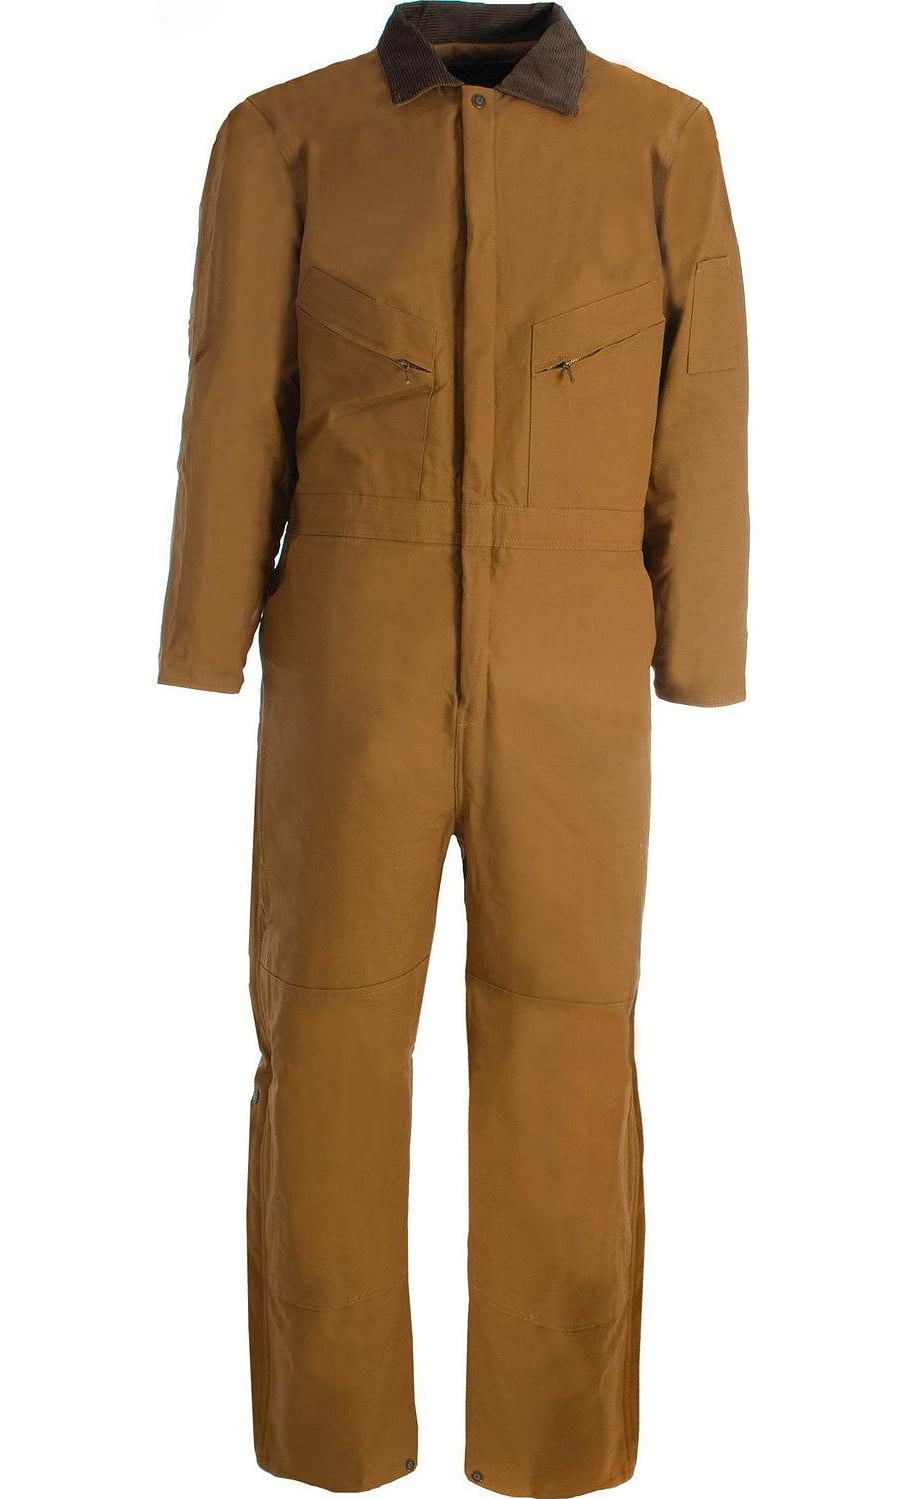 Berne - Berne Deluxe Insulated Coverall Size 3XL Short (Brown Duck ...